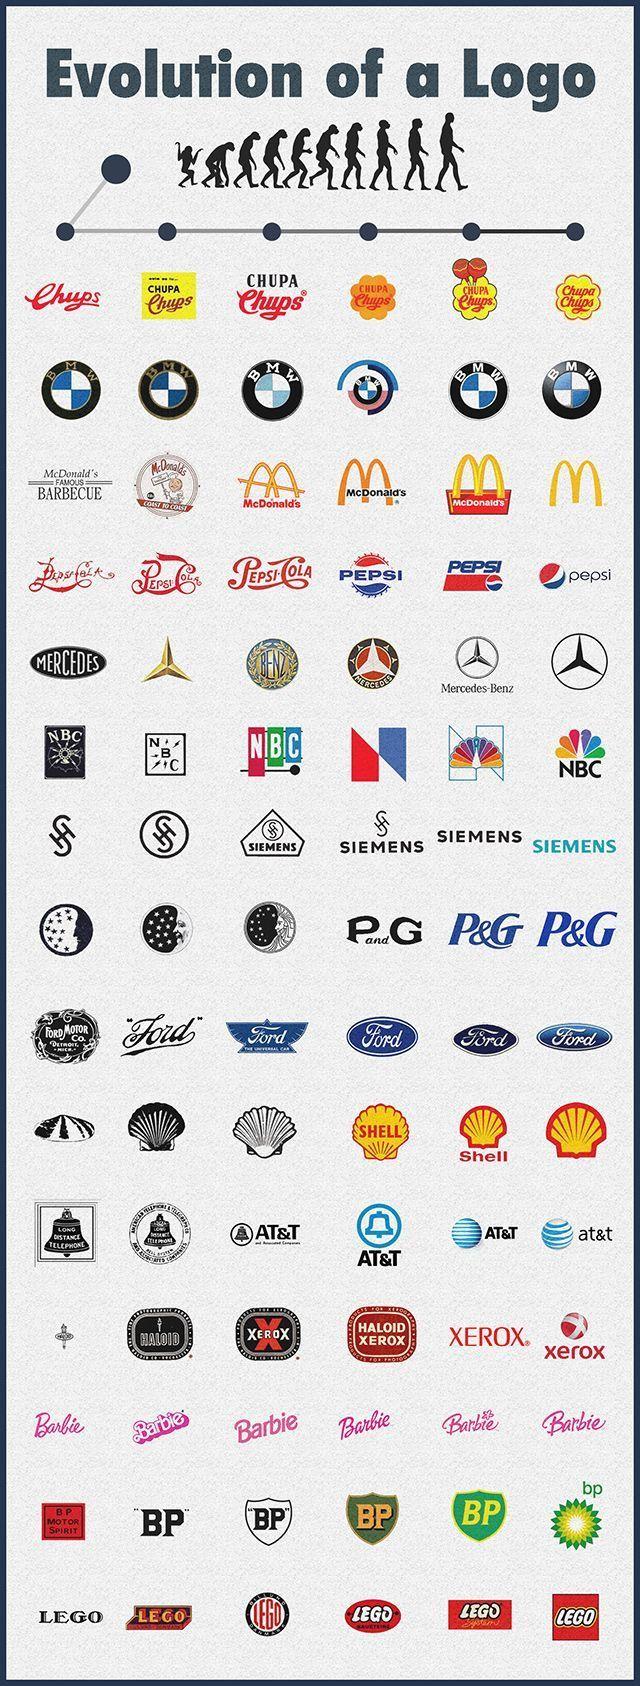 Famous Modern Logo - See how 15 famous logos have evolved over the years, showing how a